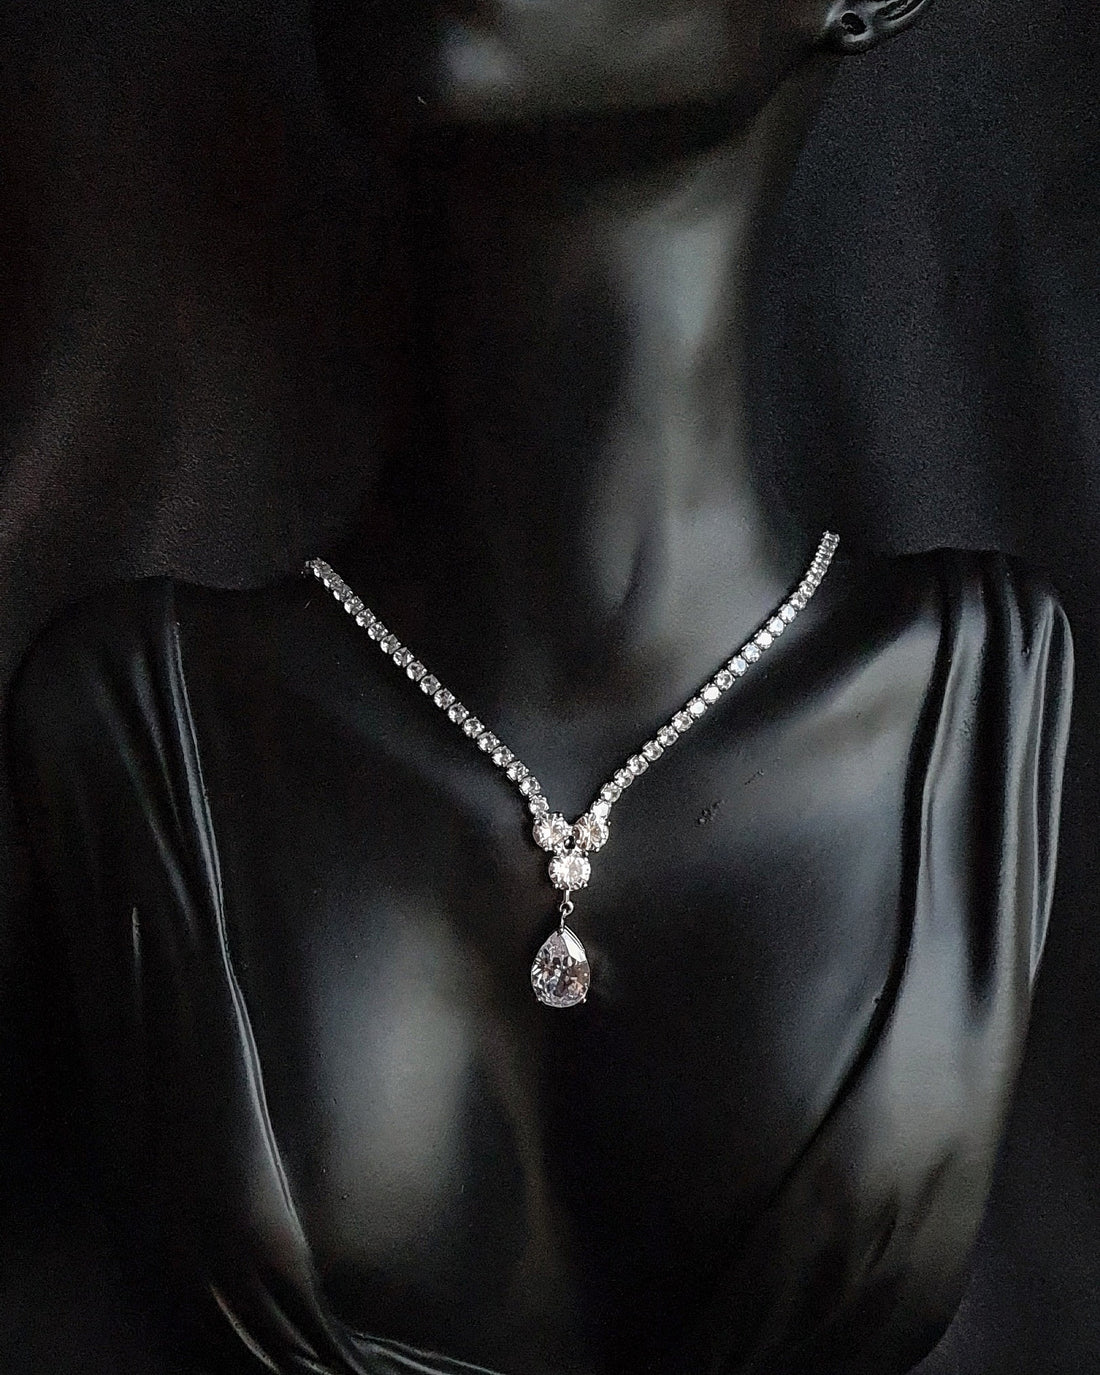  Rose Necklace features a radiant cubic zirconia stone